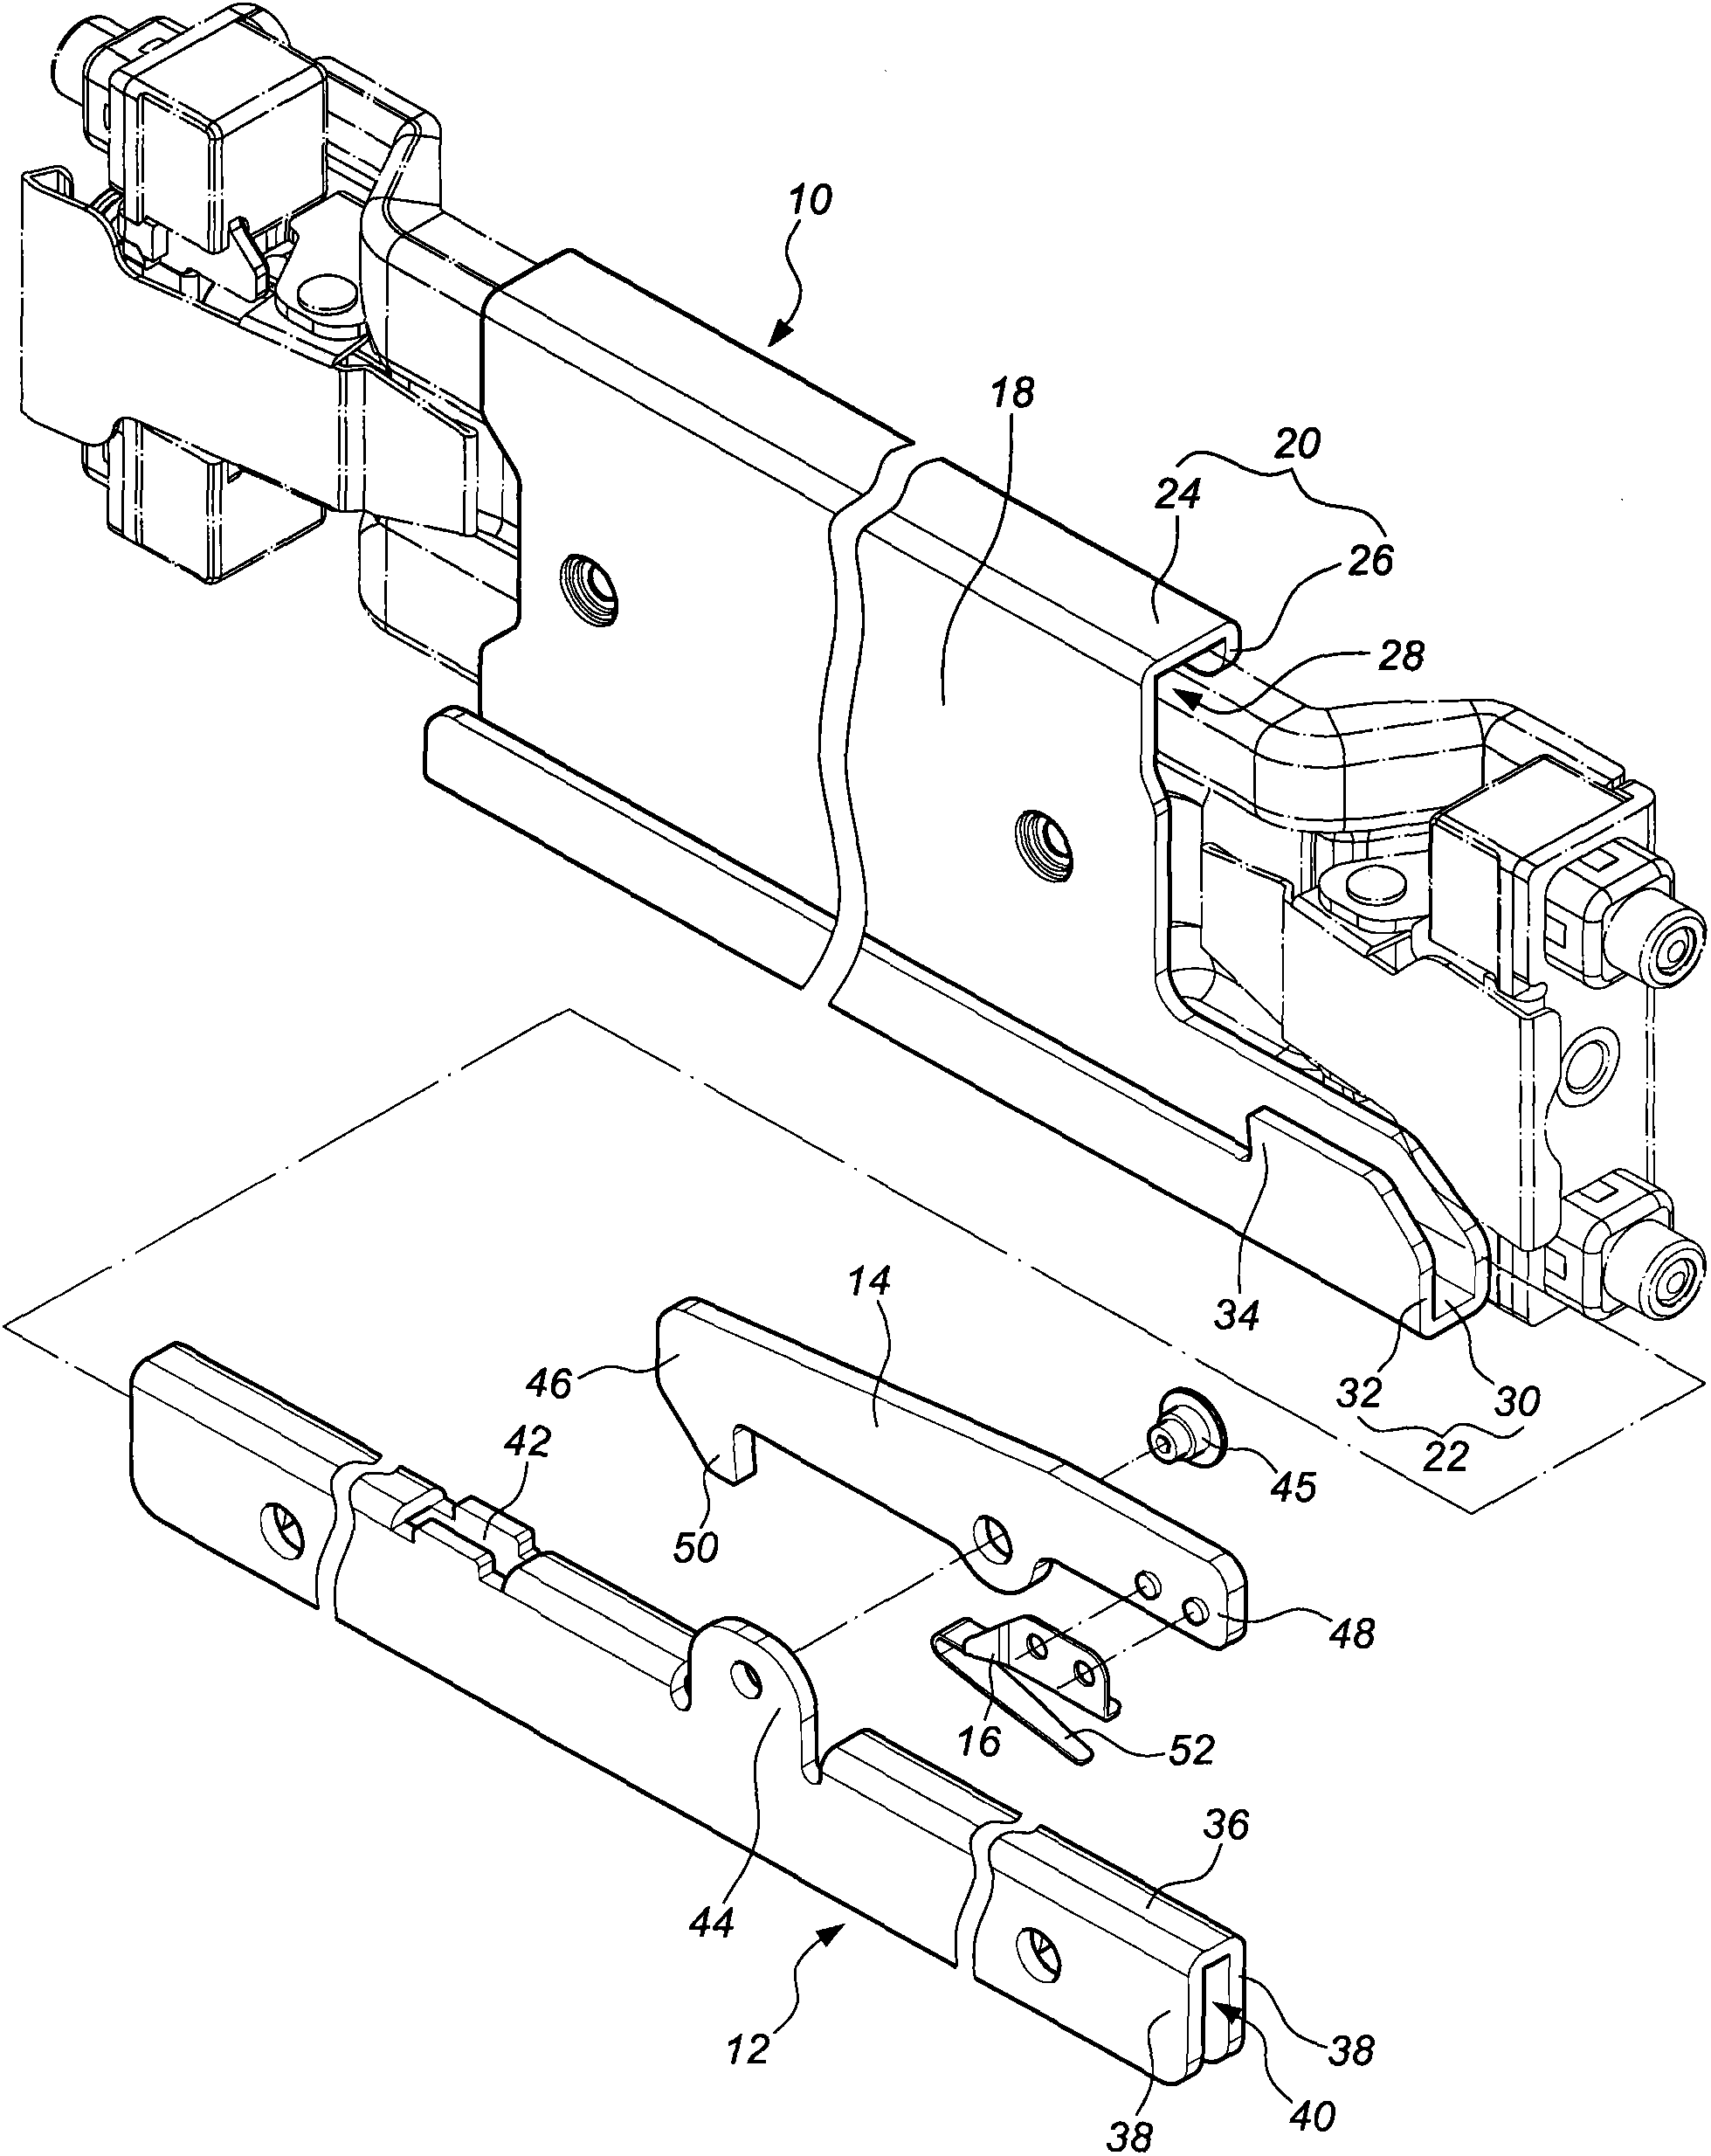 Anti-slipping supporting rail assembly